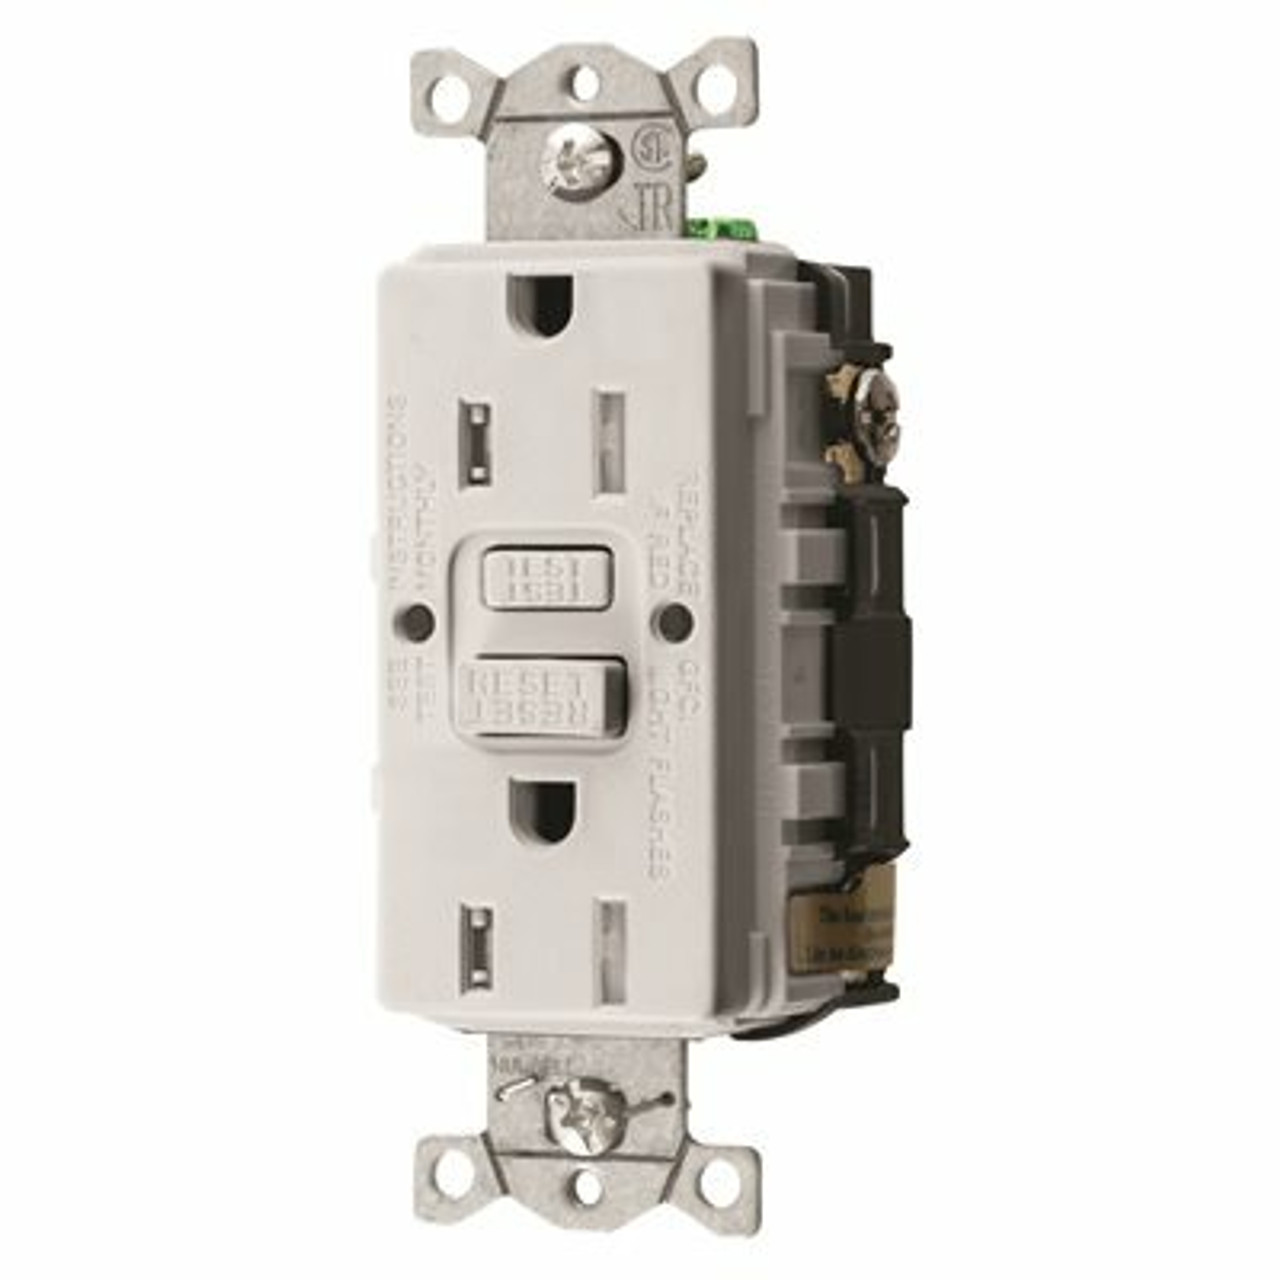 Hubbell Wiring 15 Amp 125-Volt Nema 5-15R Hubbell Autoguard Commercial Standard Tamper-Resistant Gfci Receptacle, White